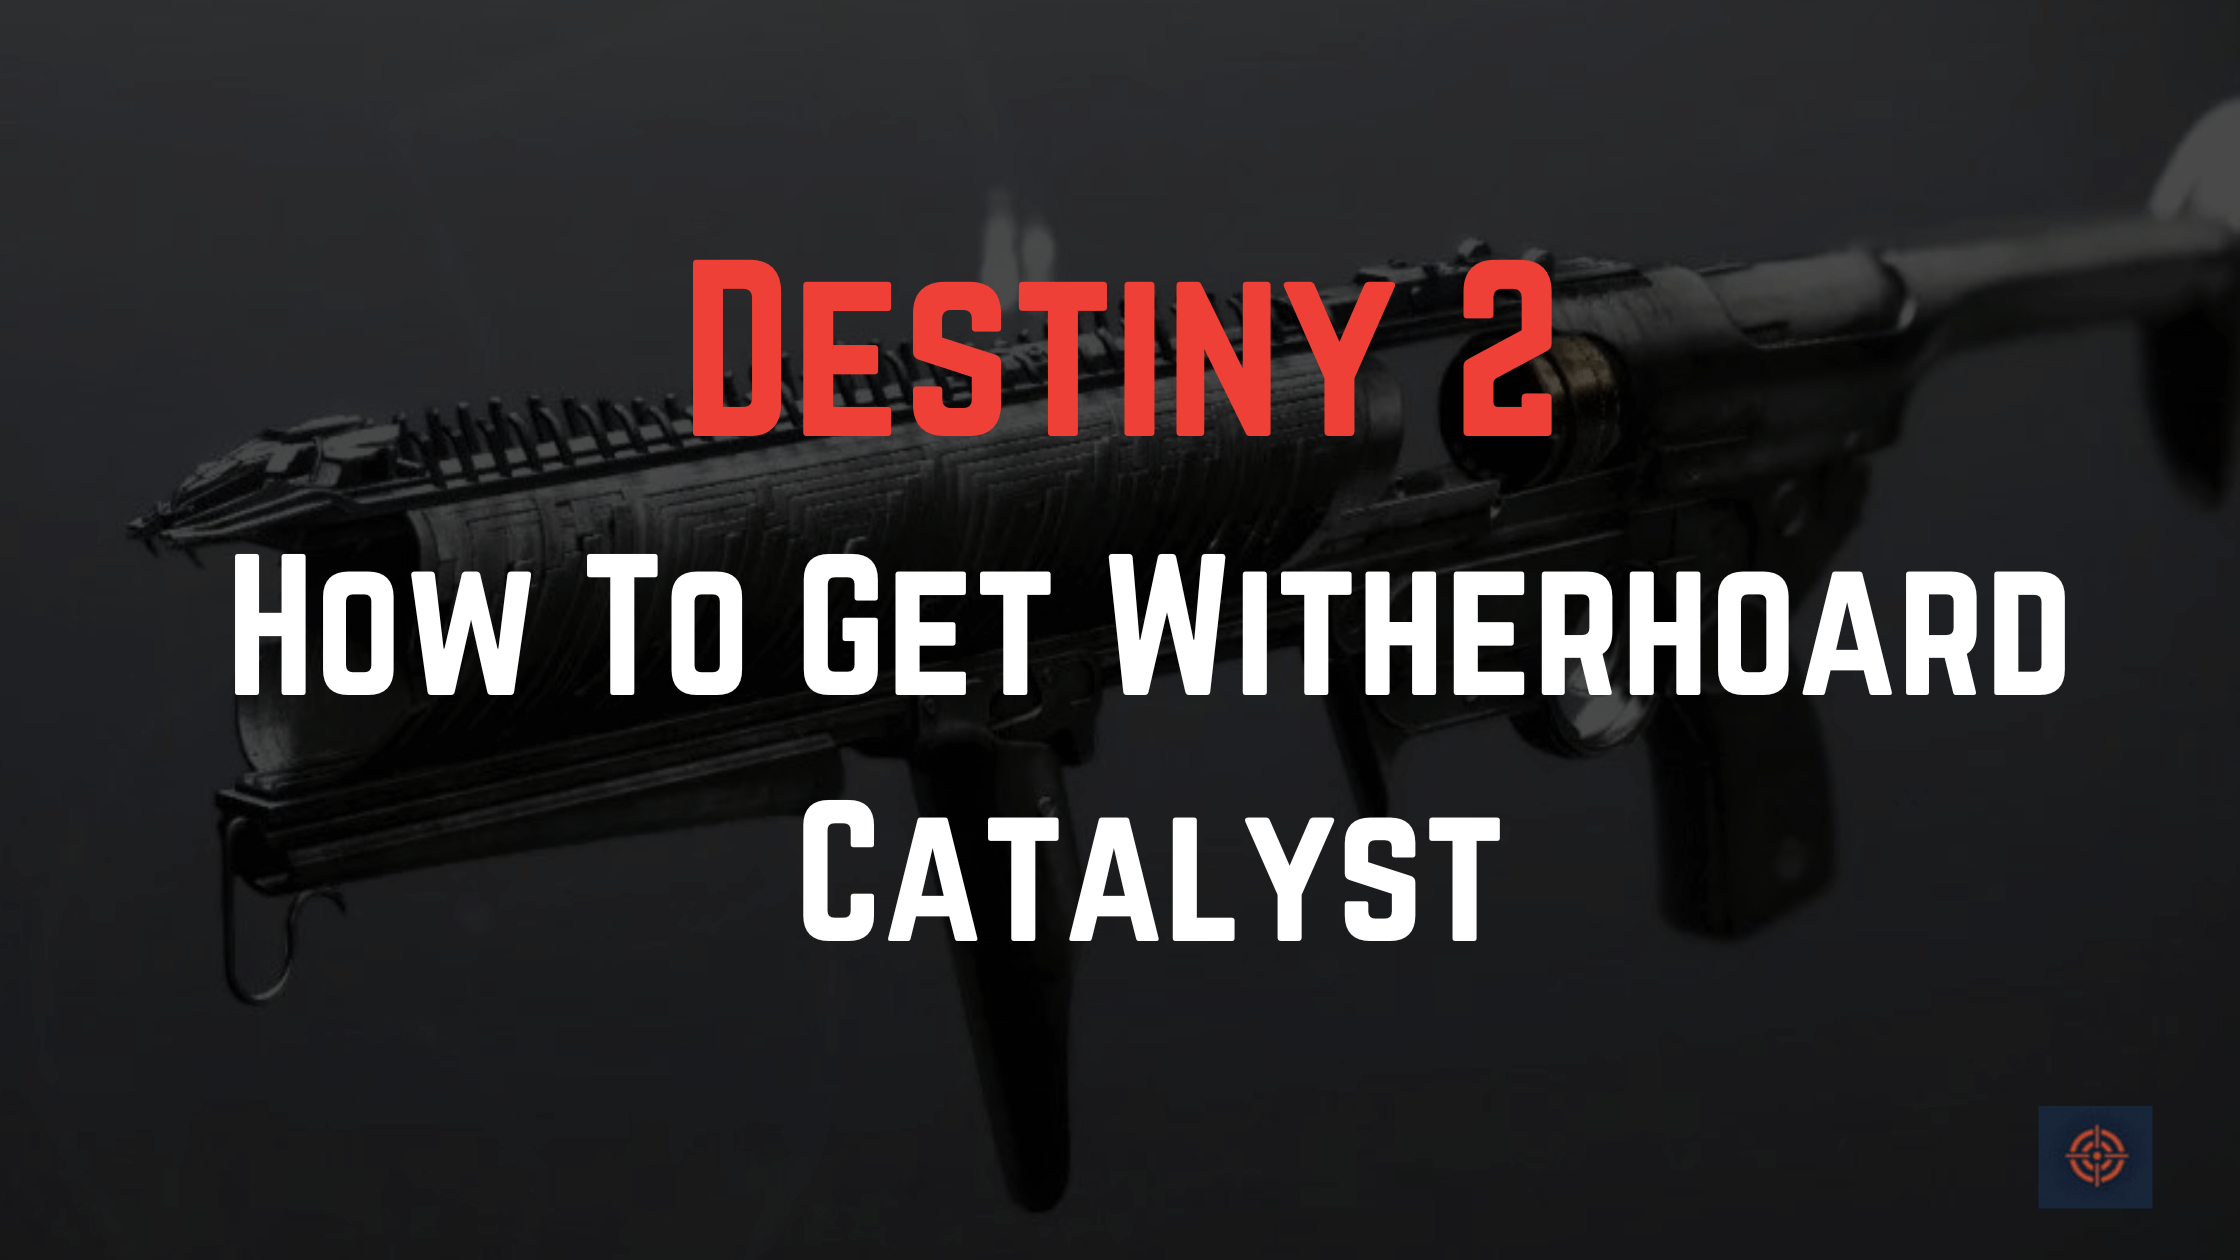 Destiny 2 How To Get Witherhoard Catalyst